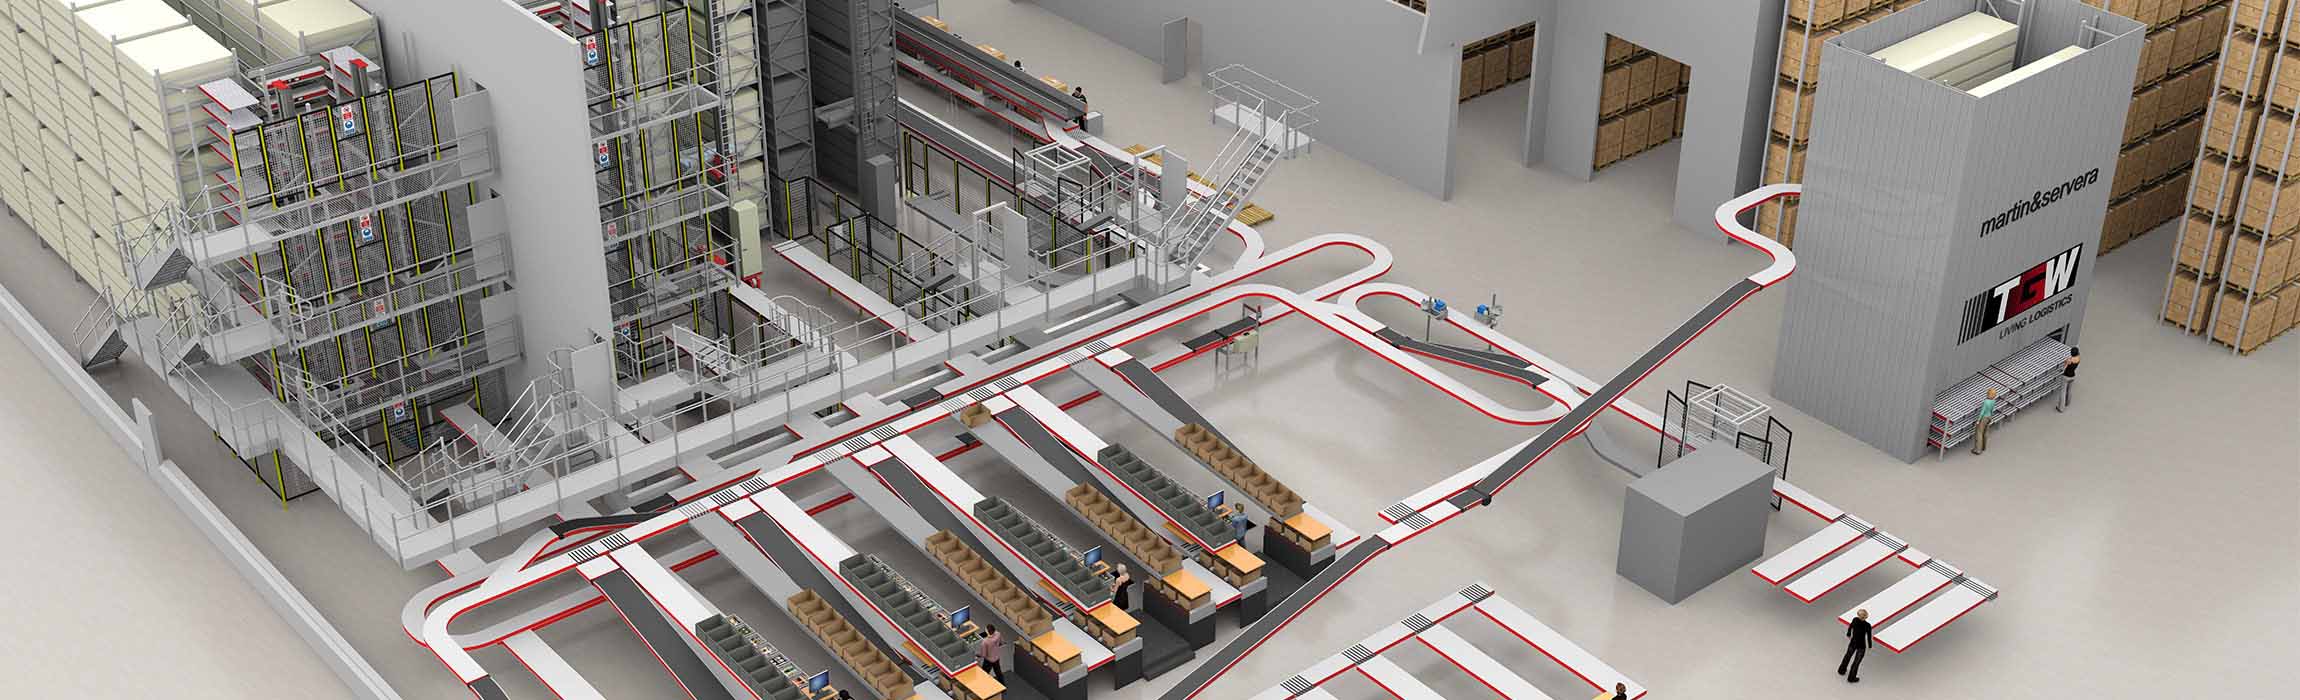 TGW will build a highly automated fulfillment center in Norrköping for the Swedish food wholesaler Martin & Servera by March 2022.